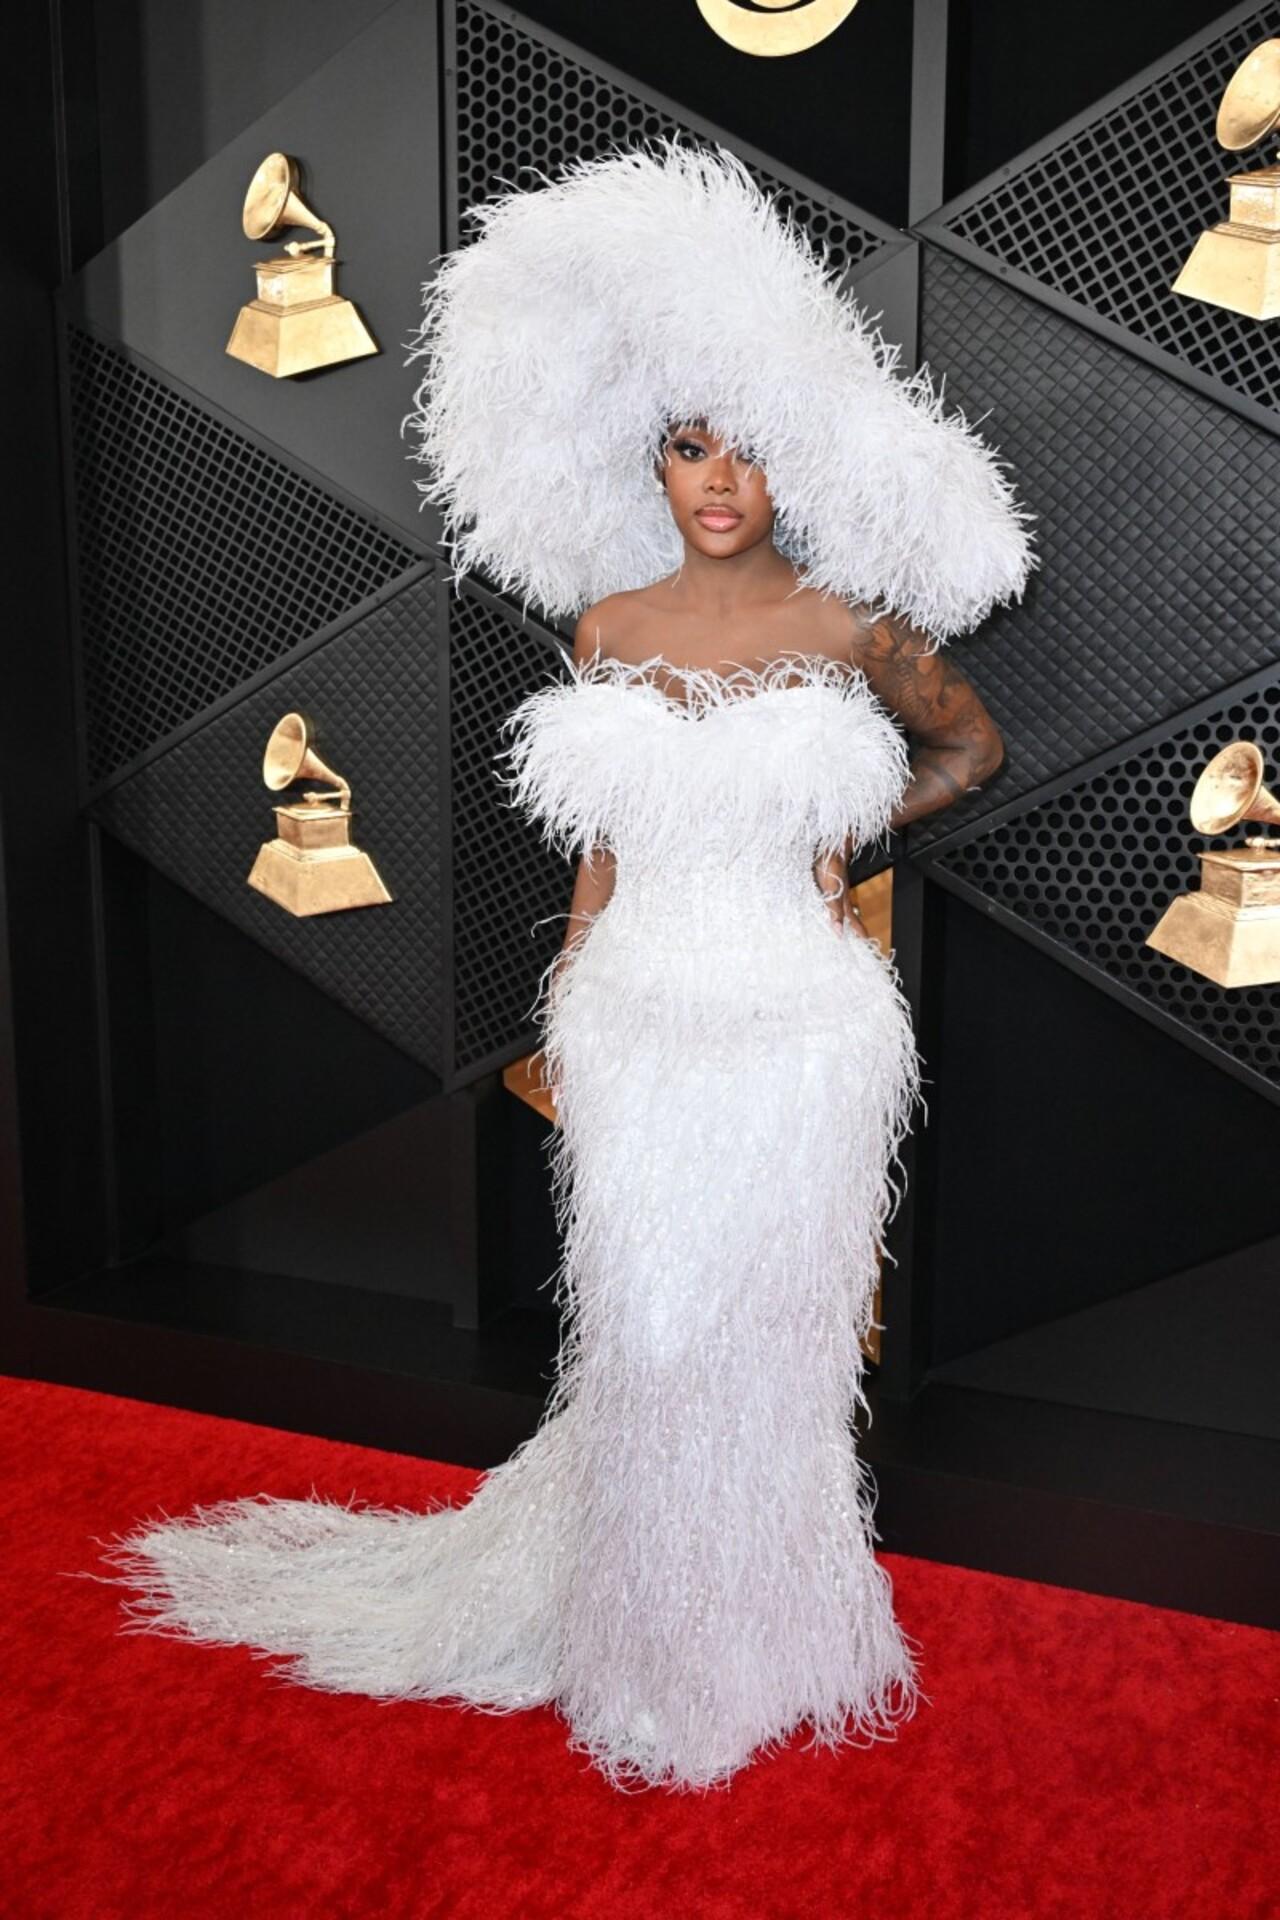 Summer Walker stood out in this white feather dress with a matching headgear